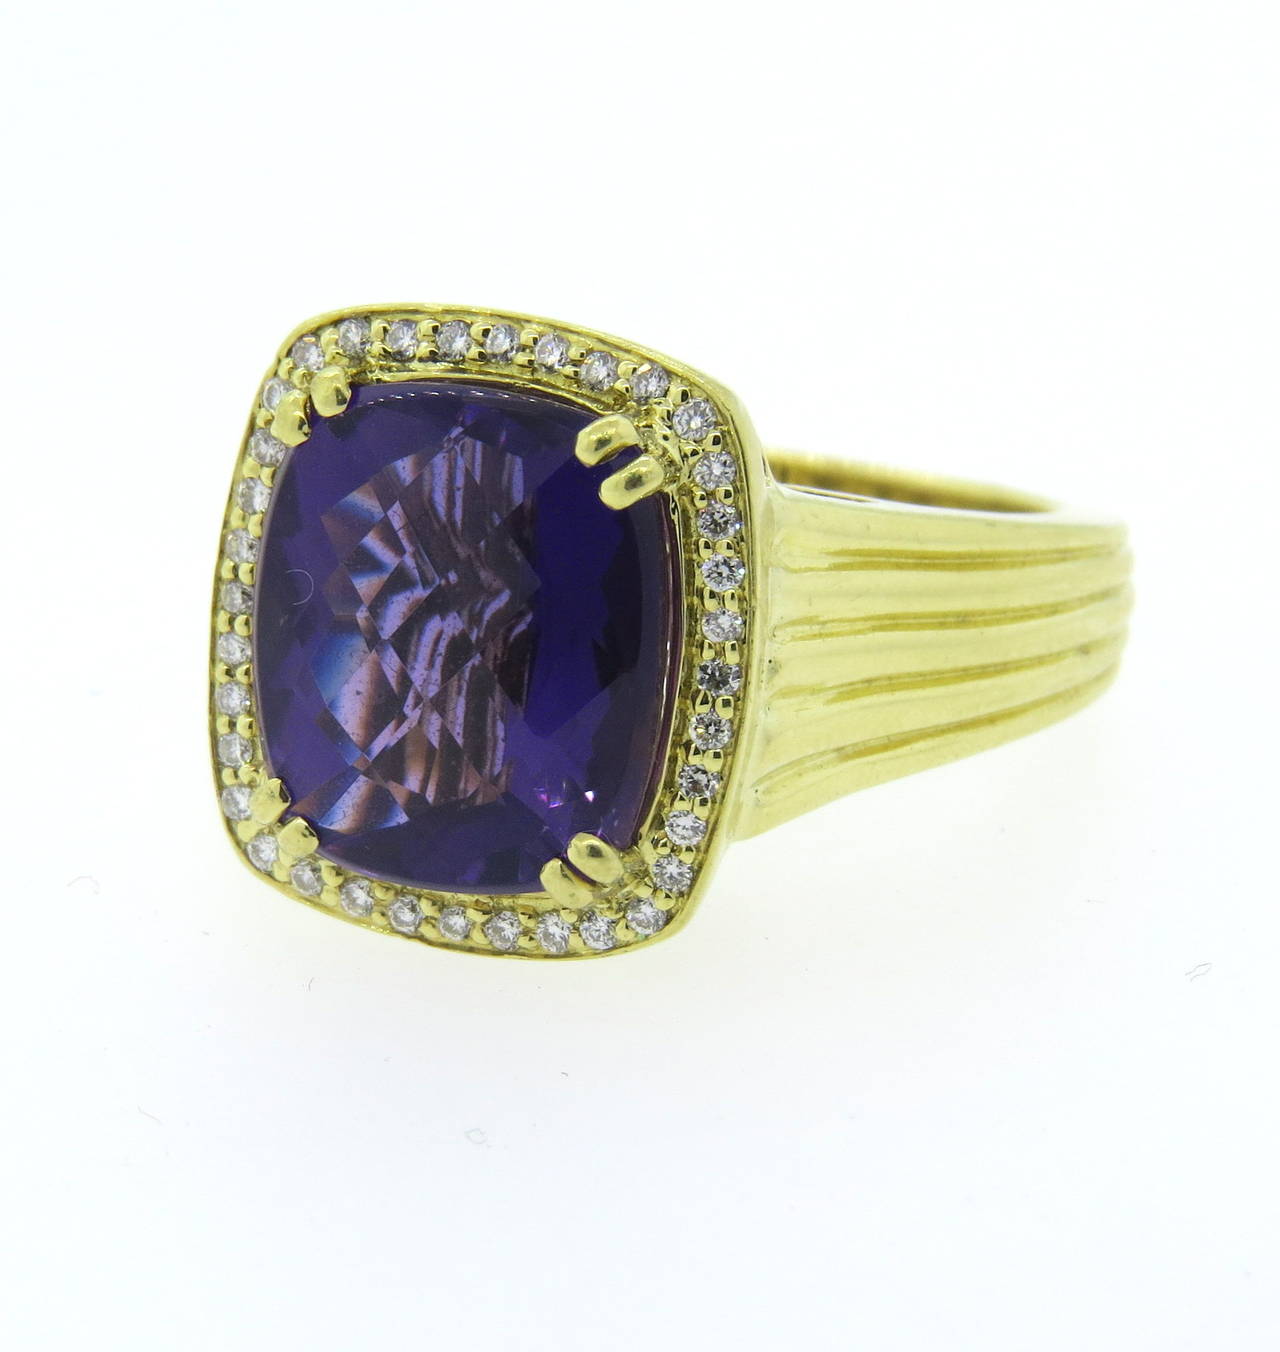 18k gold ring by Charles Krypell, featuring 13.86mm x 11.95mm amethyst, surrounded with approx. 0.38ctw in diamonds. Ring is a size 10, ring top is 18mm x 16mm. Marked Krypell,18k. Weight of the piece - 18.3 grams